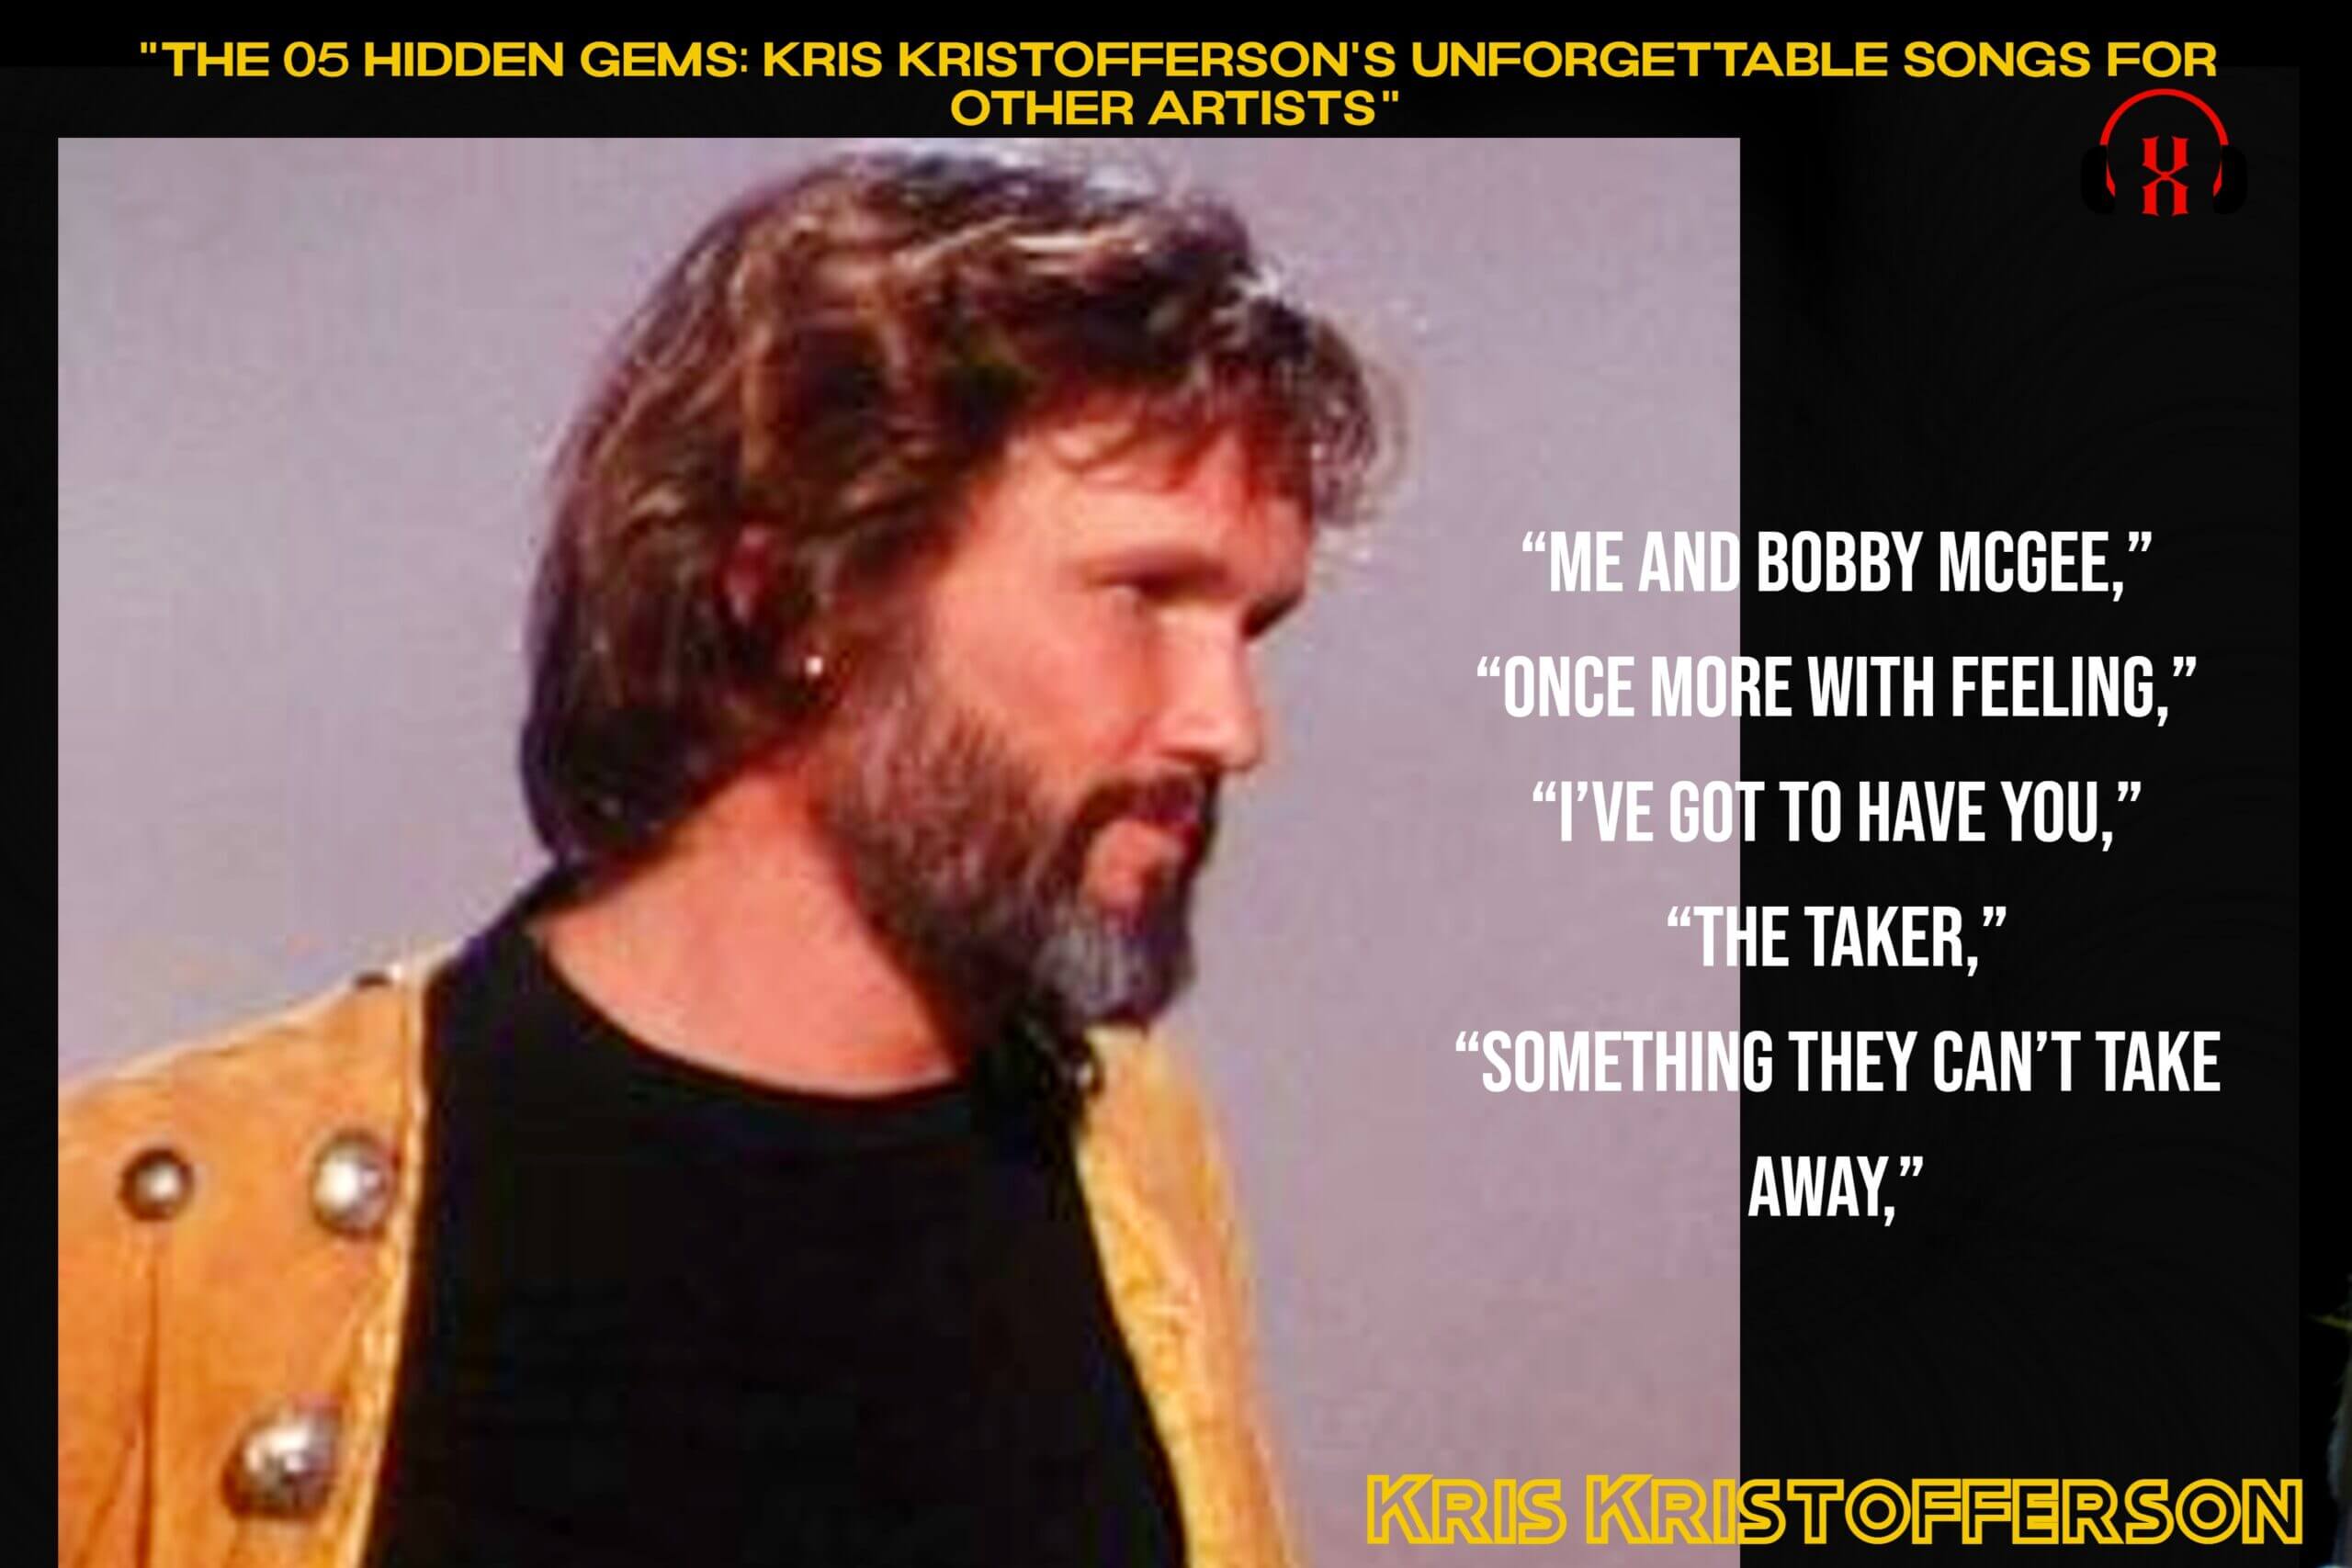 “The 05 Hidden Gems: Kris Kristofferson’s Unforgettable Songs for Other Artists”